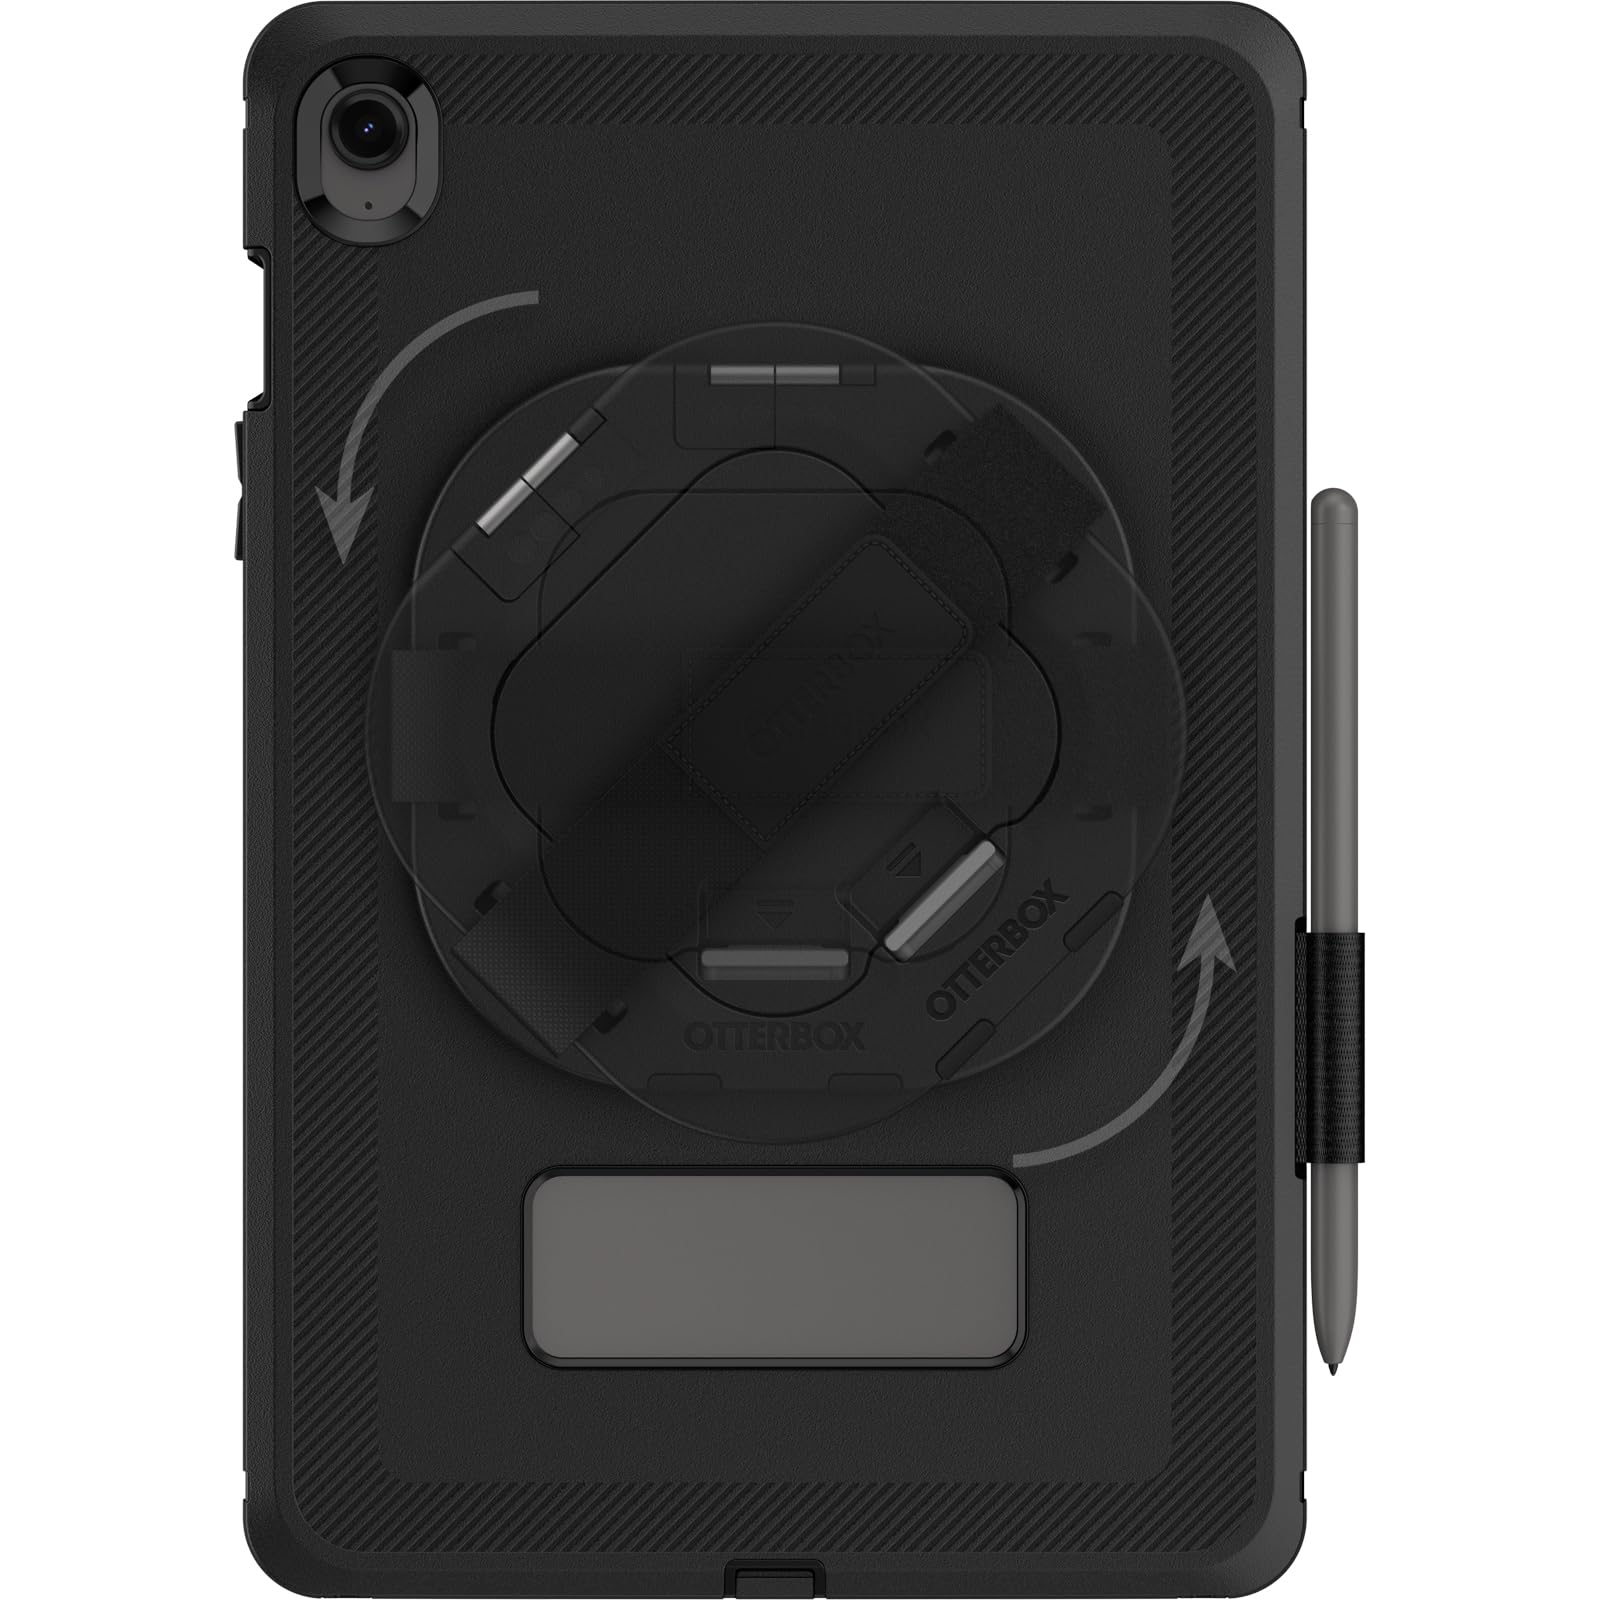 OtterBox Defender for Business W/Kickstand/HANDSTRAP for TAB S9 FE (ONLY) - Black (Non-Retail Packaging)